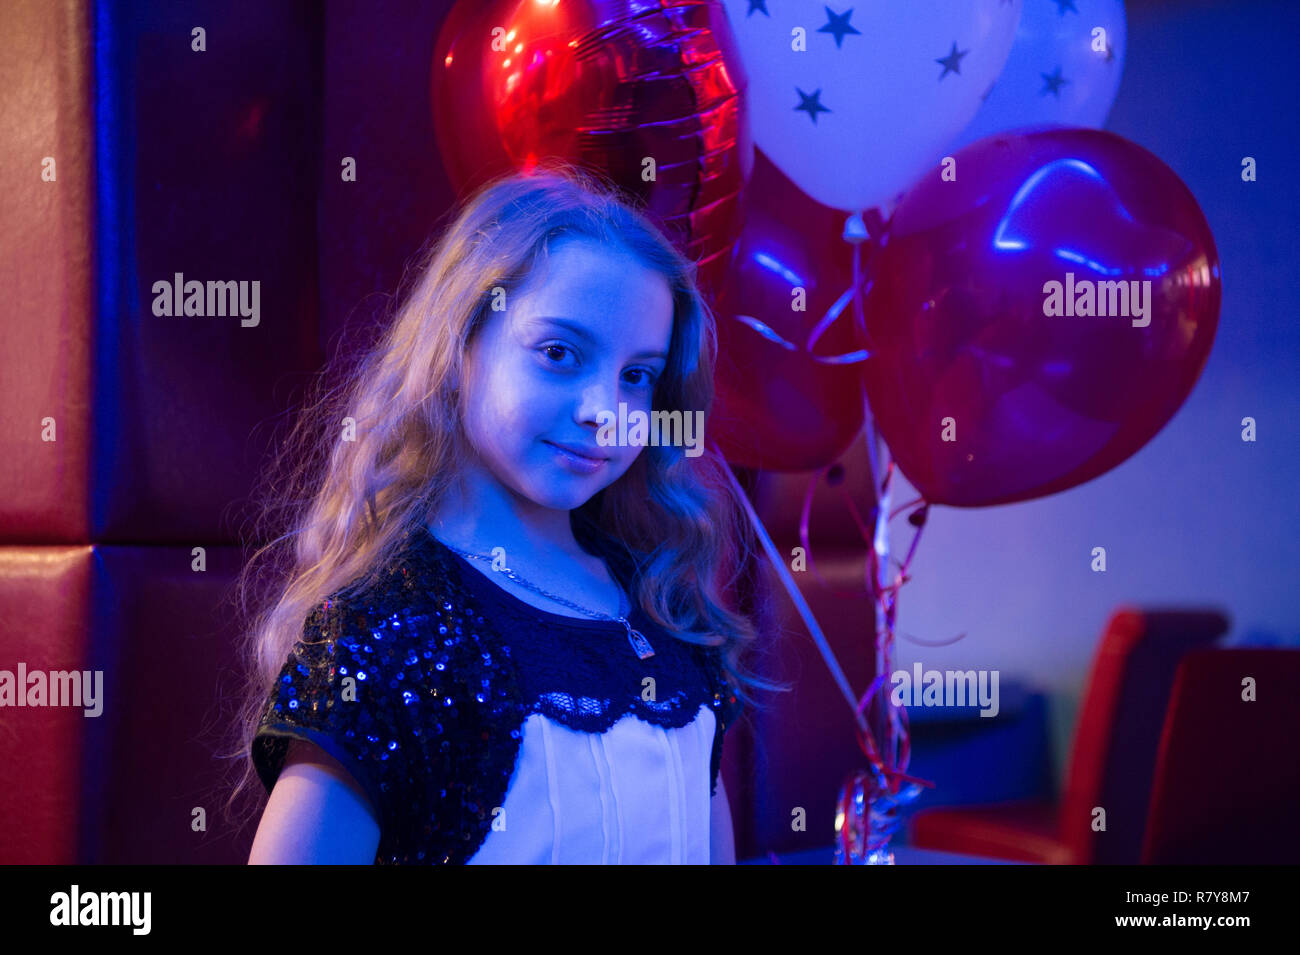 girl cute smiling child hold bunch balloons lighted with blue light girl with balloons celebrate birthday in bowling club birthday party at bowling ideas how to celebrate birthday for teens R7Y8M7